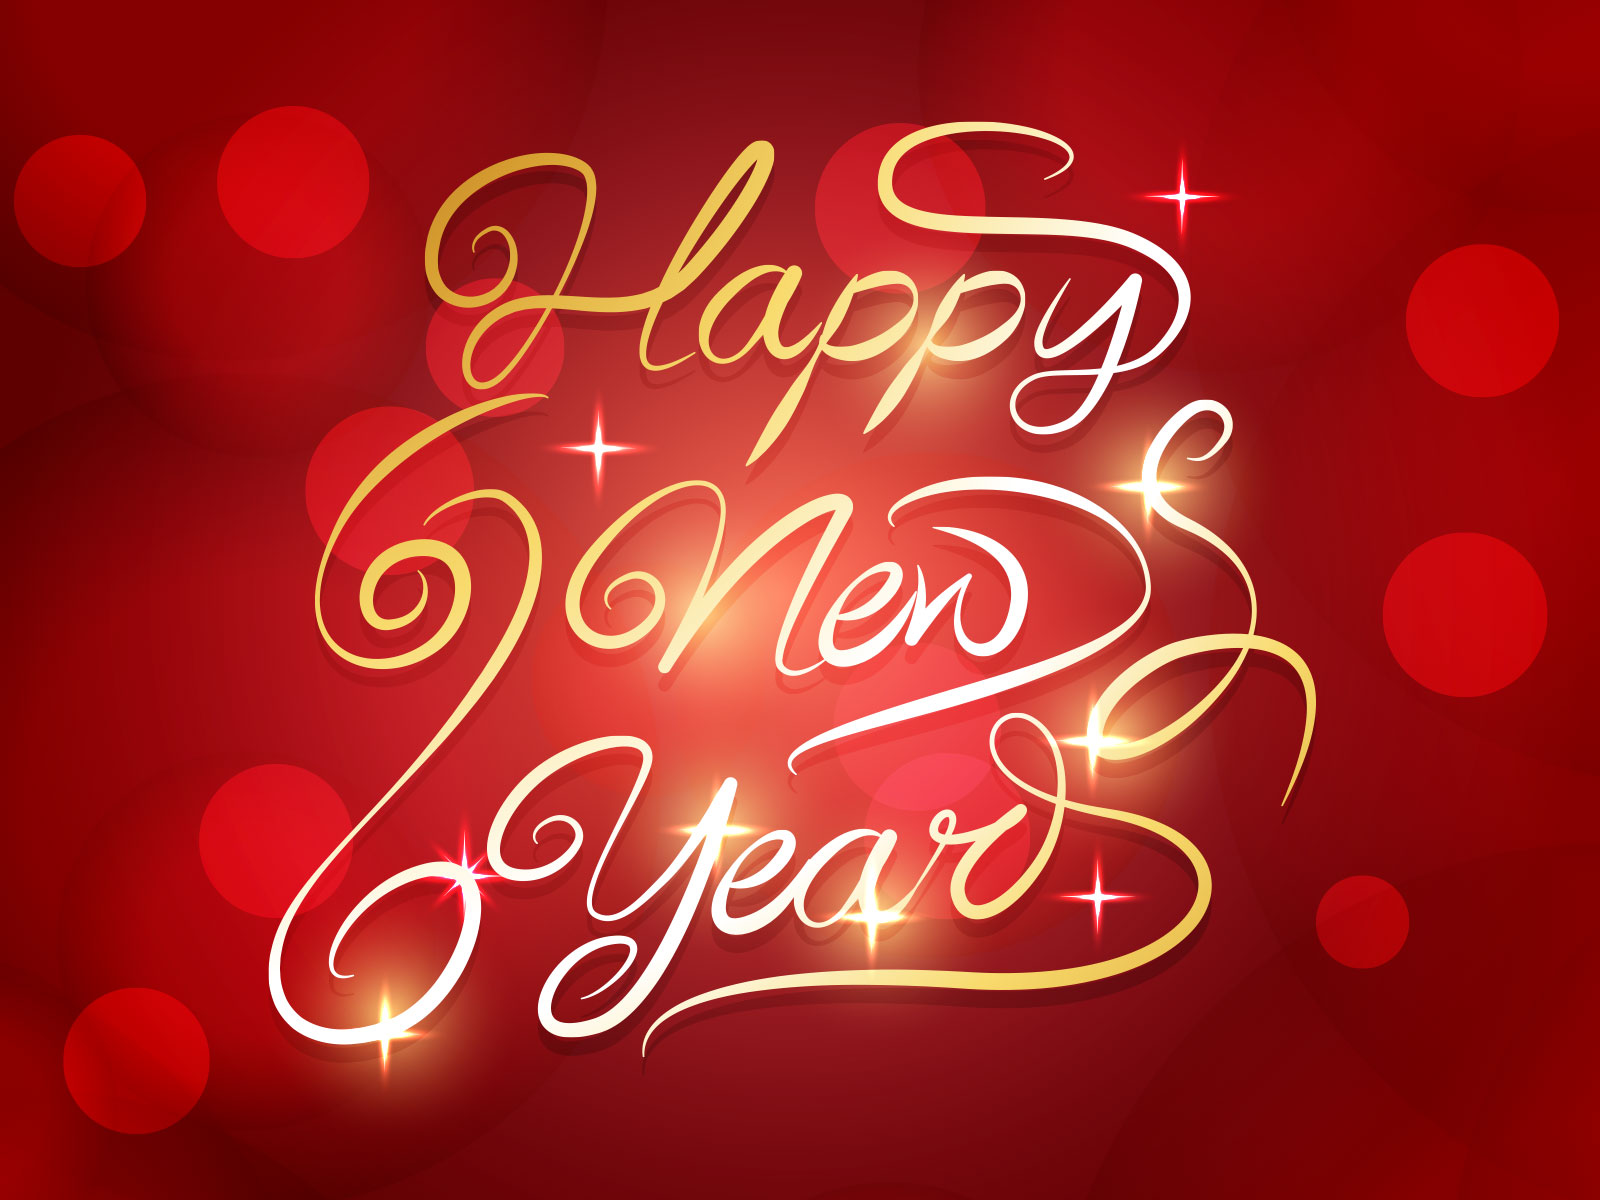 Happy New Year Wallpaper Image Cover Photos